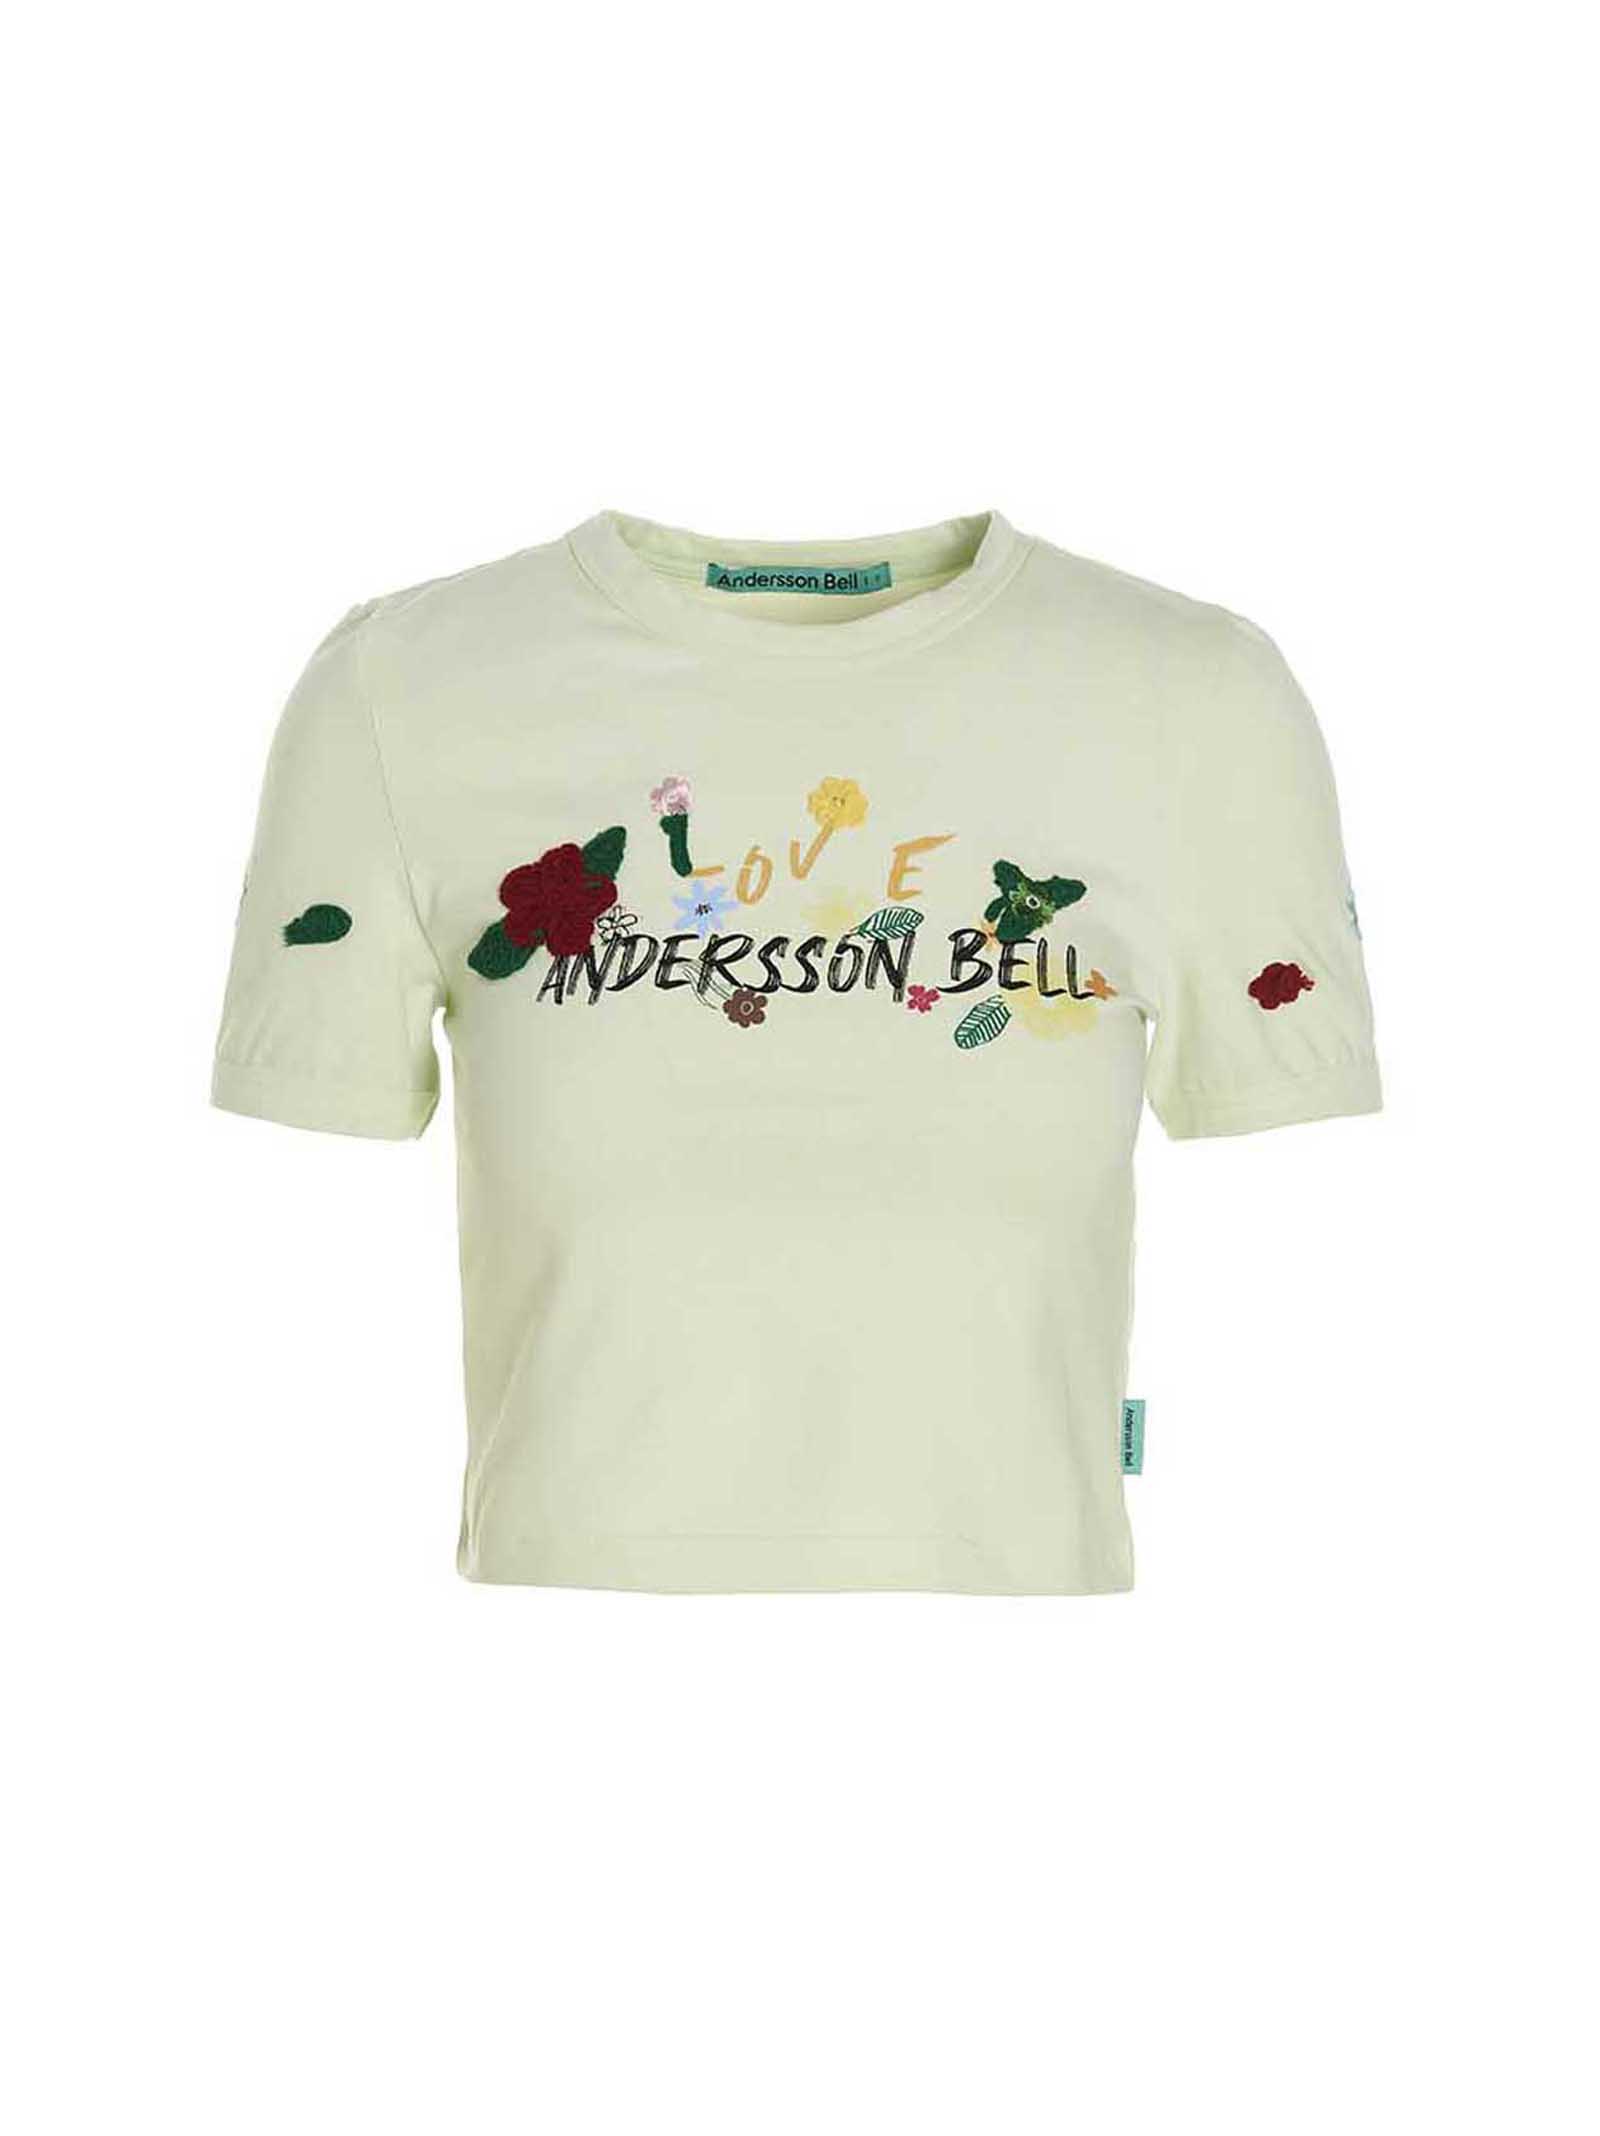 ANDERSSON BELL DASHA T-SHIRT